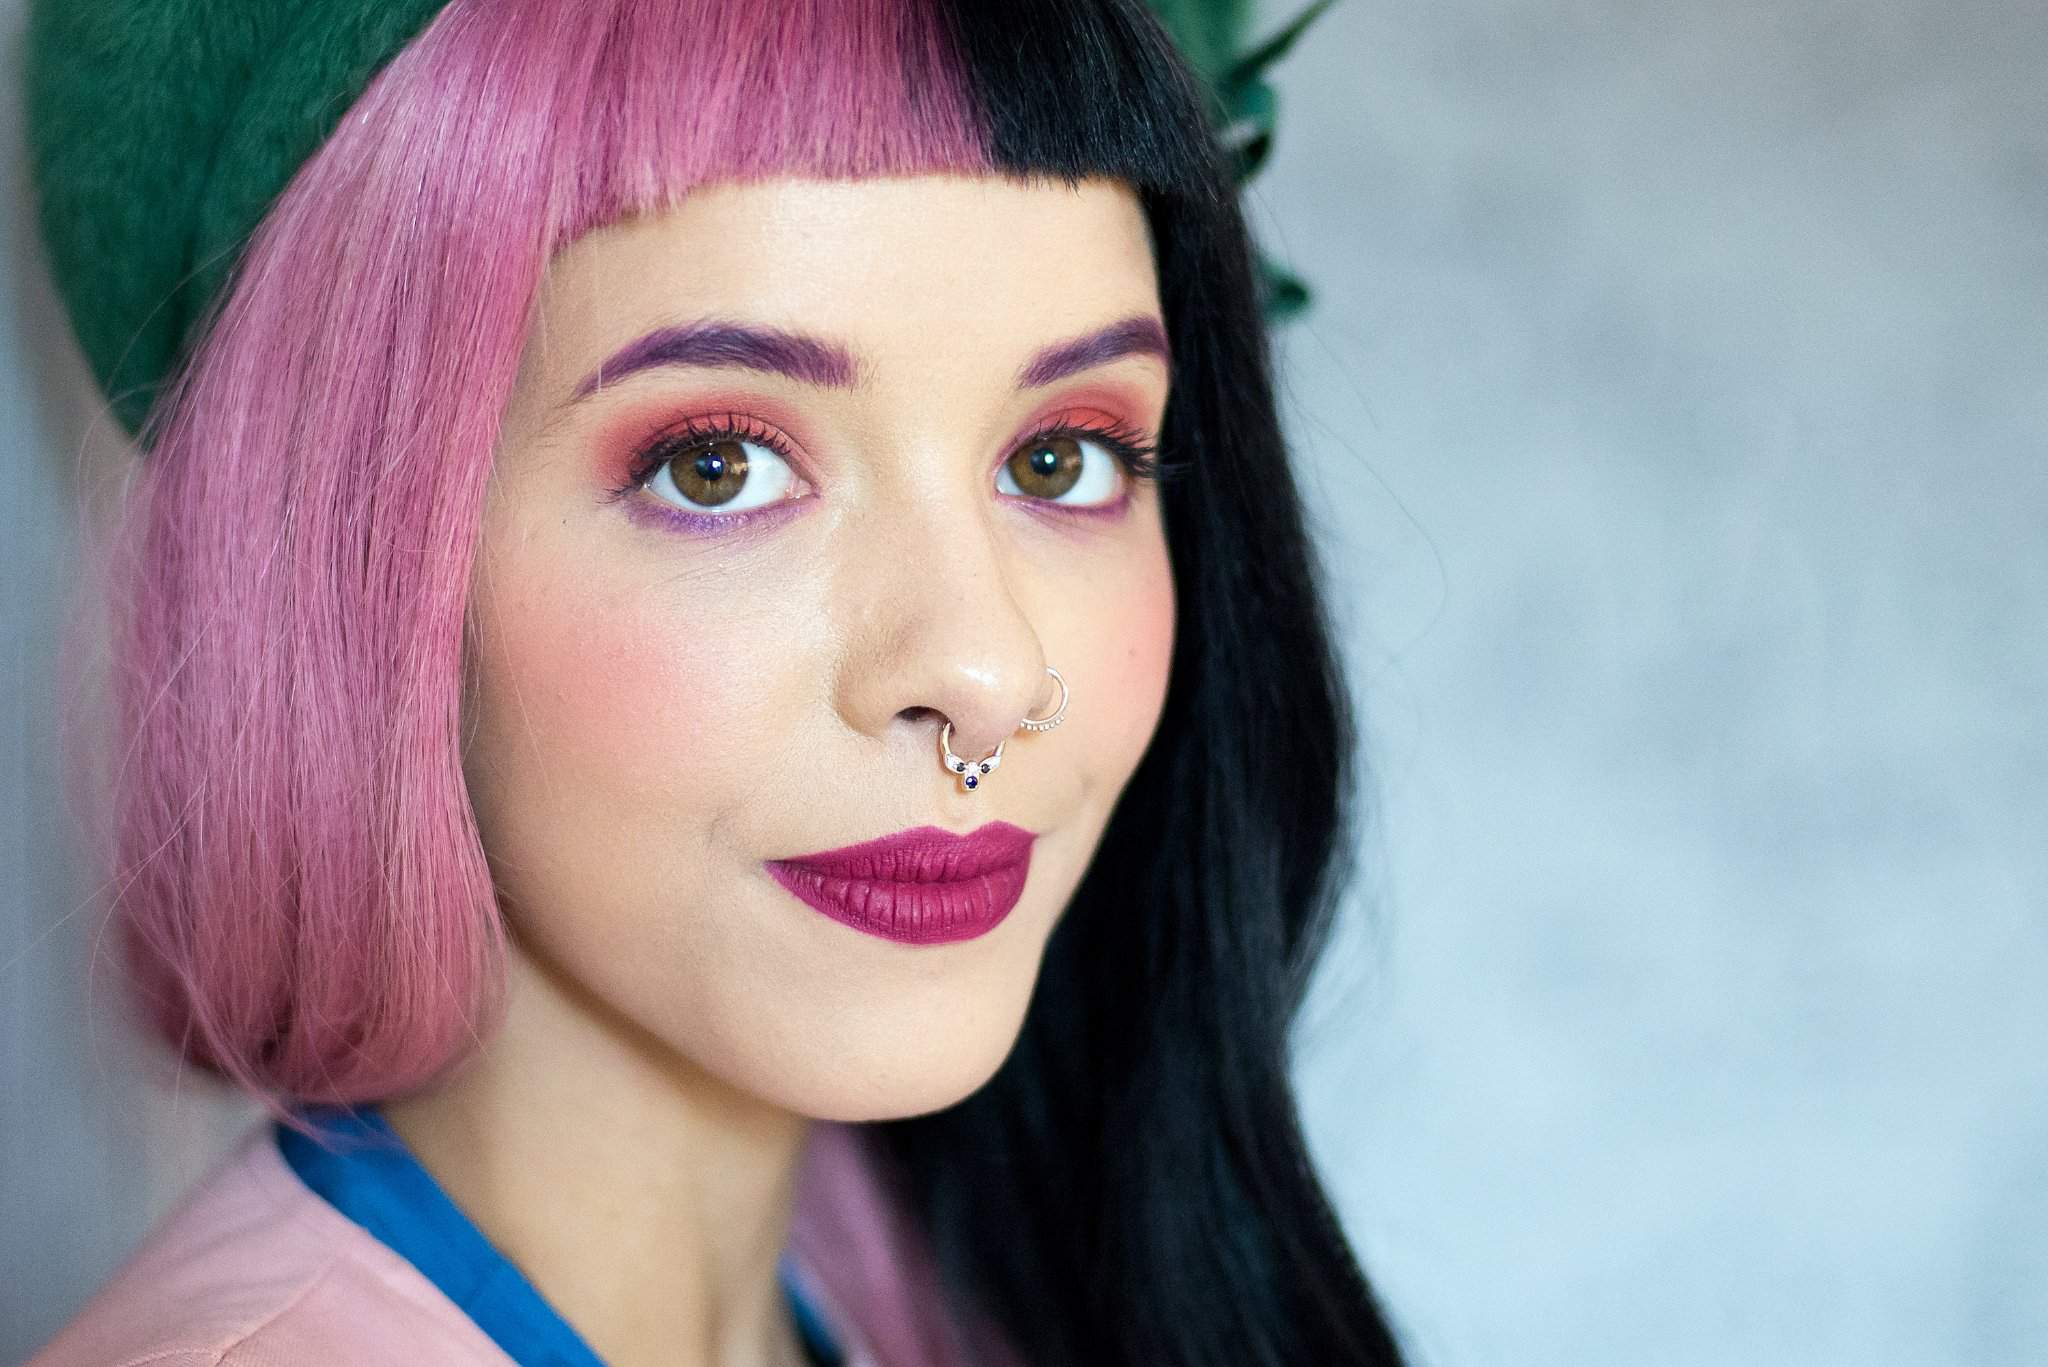 A community for all the fans of Melanie Martinez. 